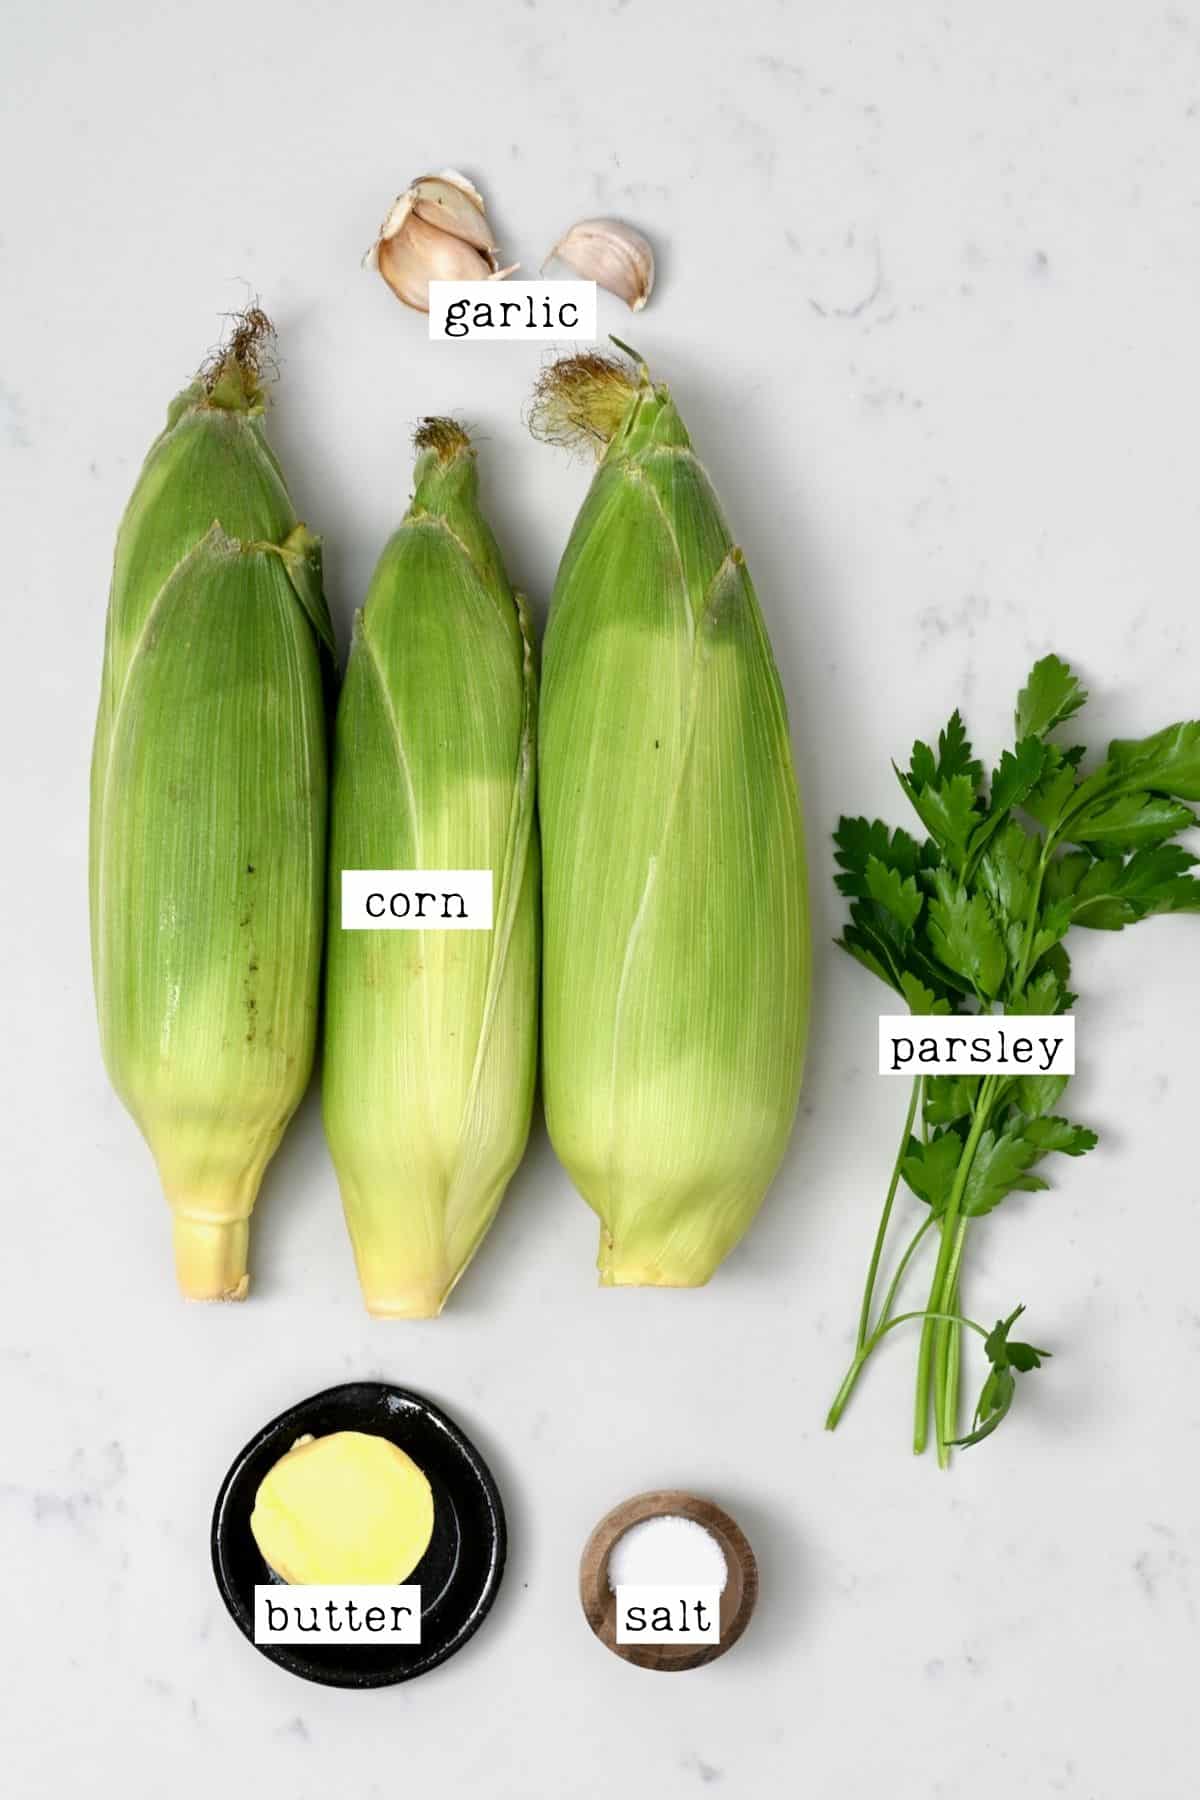 Ingredients for oven-roasted corn